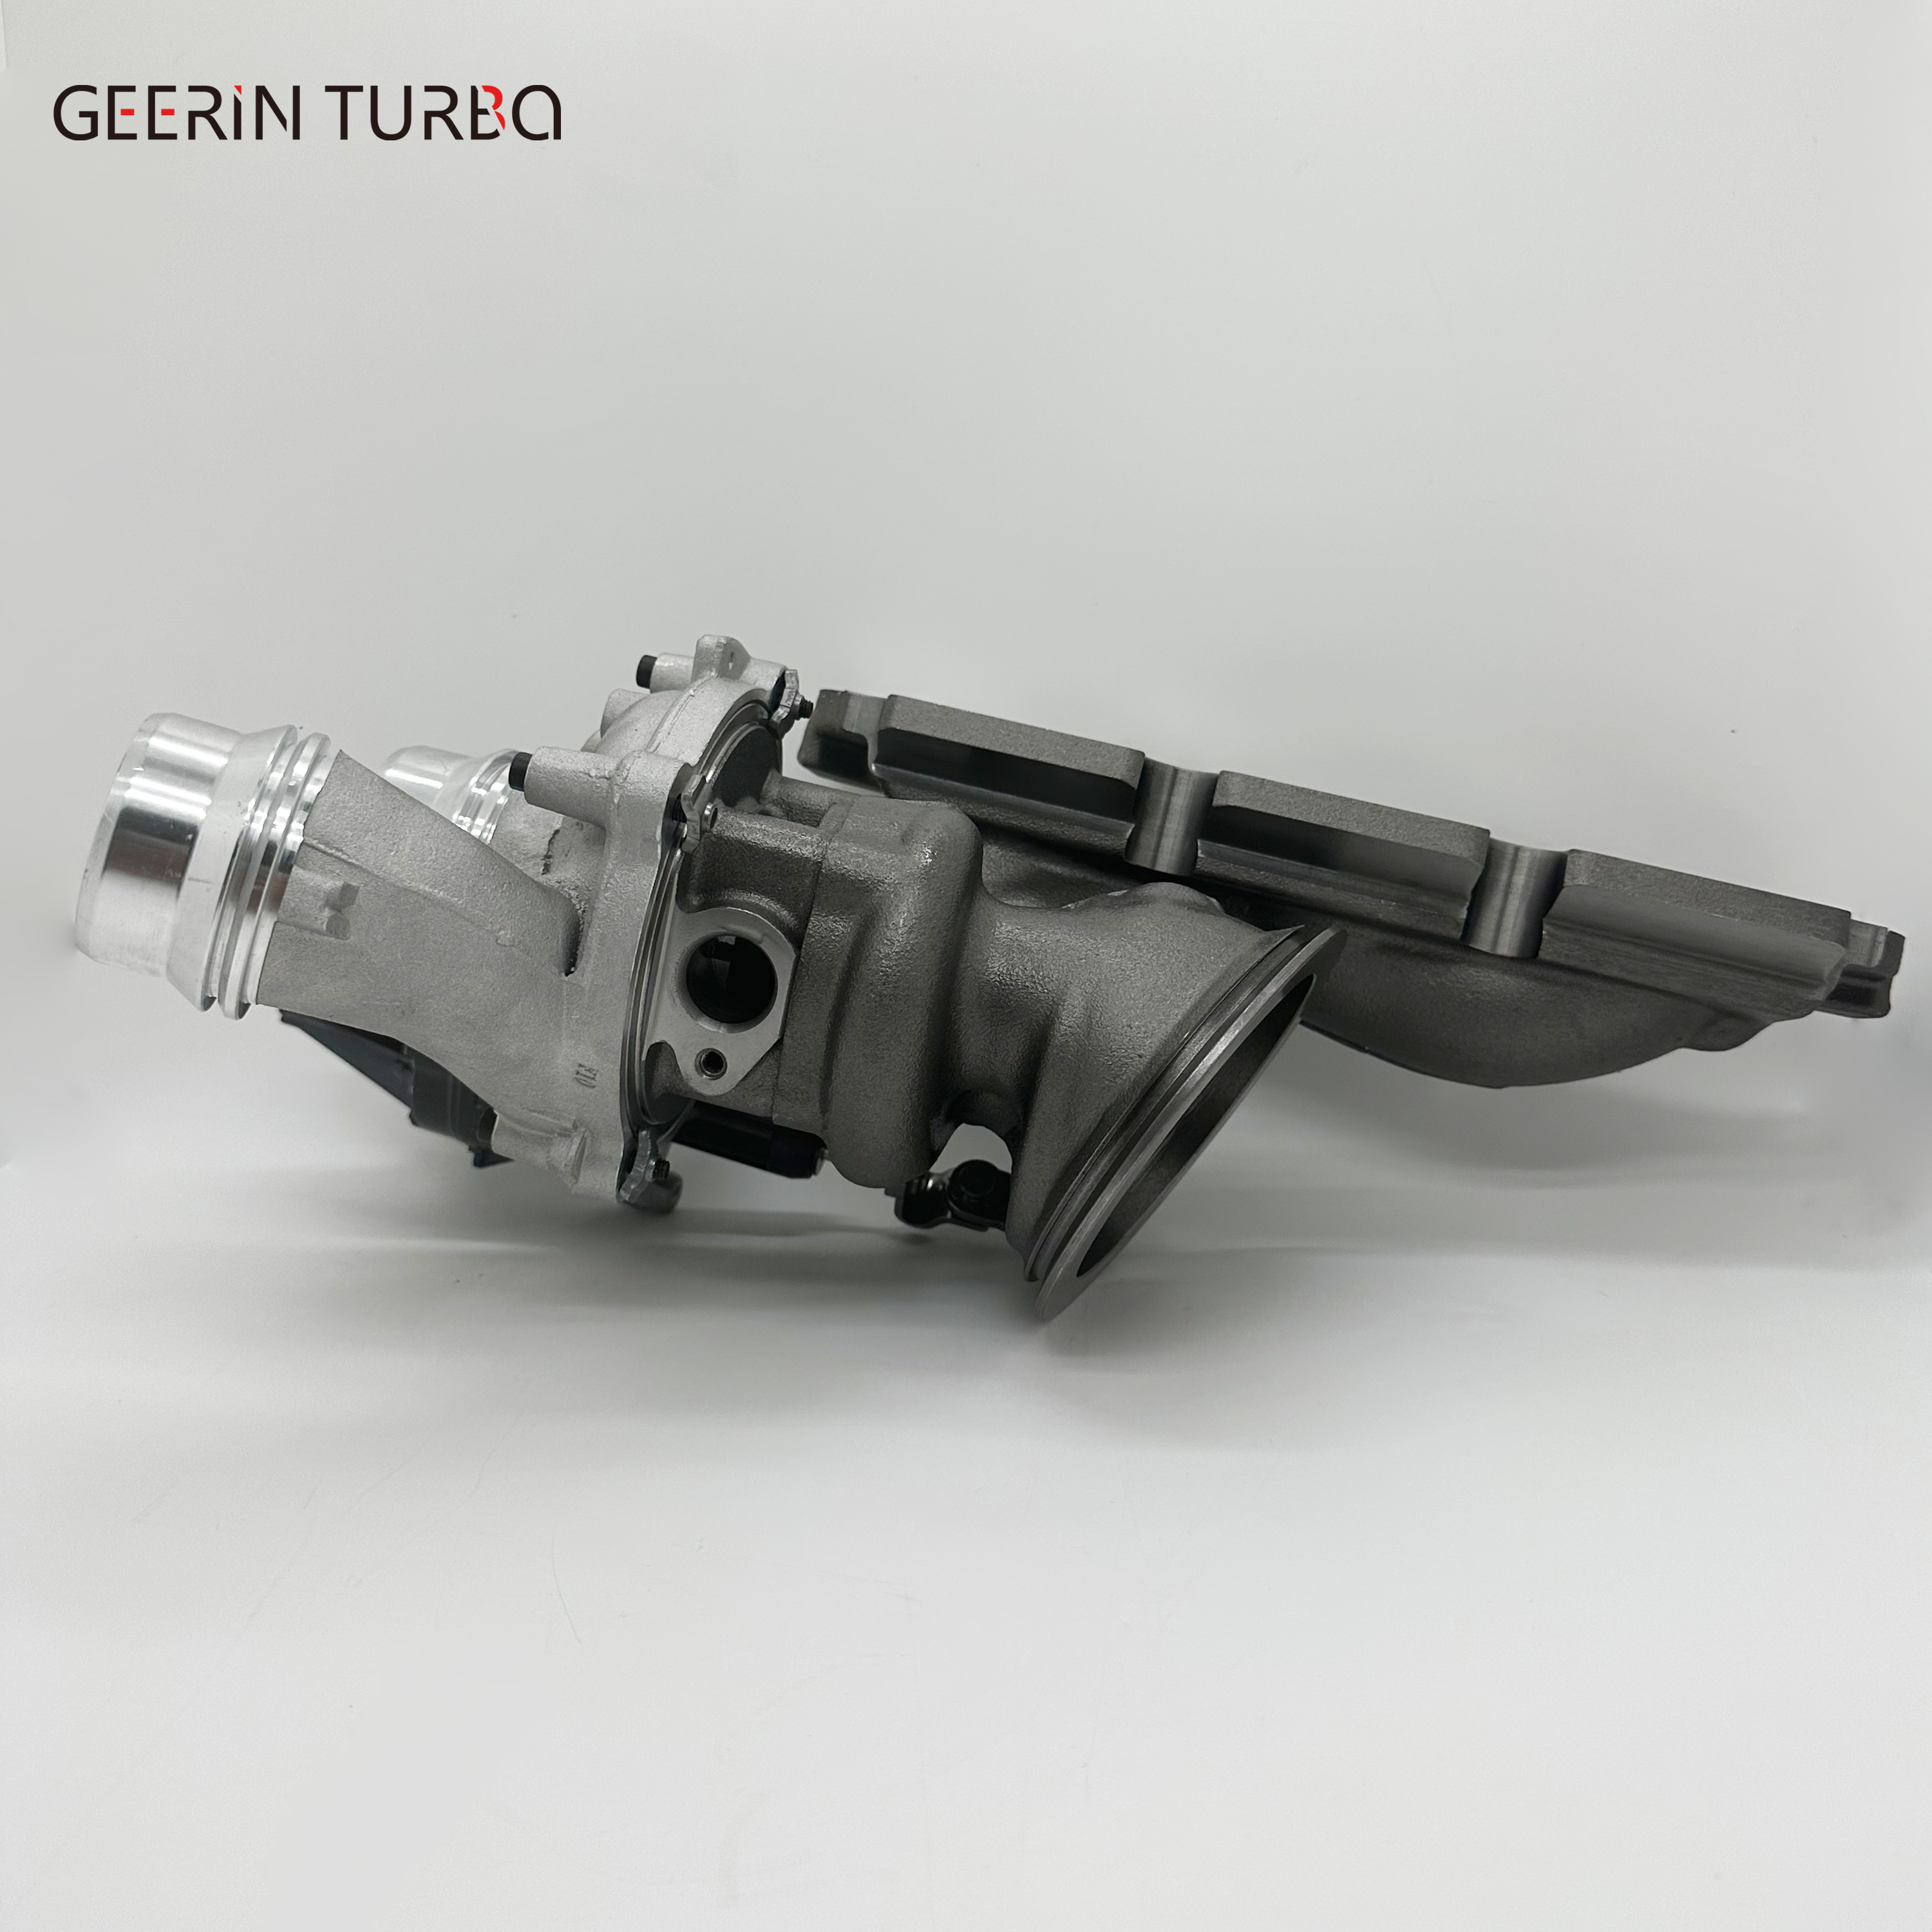 B38 7633795 11659895980 11657633795 11657636784 11658643129 11652681209 Complete Turbolader Turbocharger For BMW 1.5i Factory